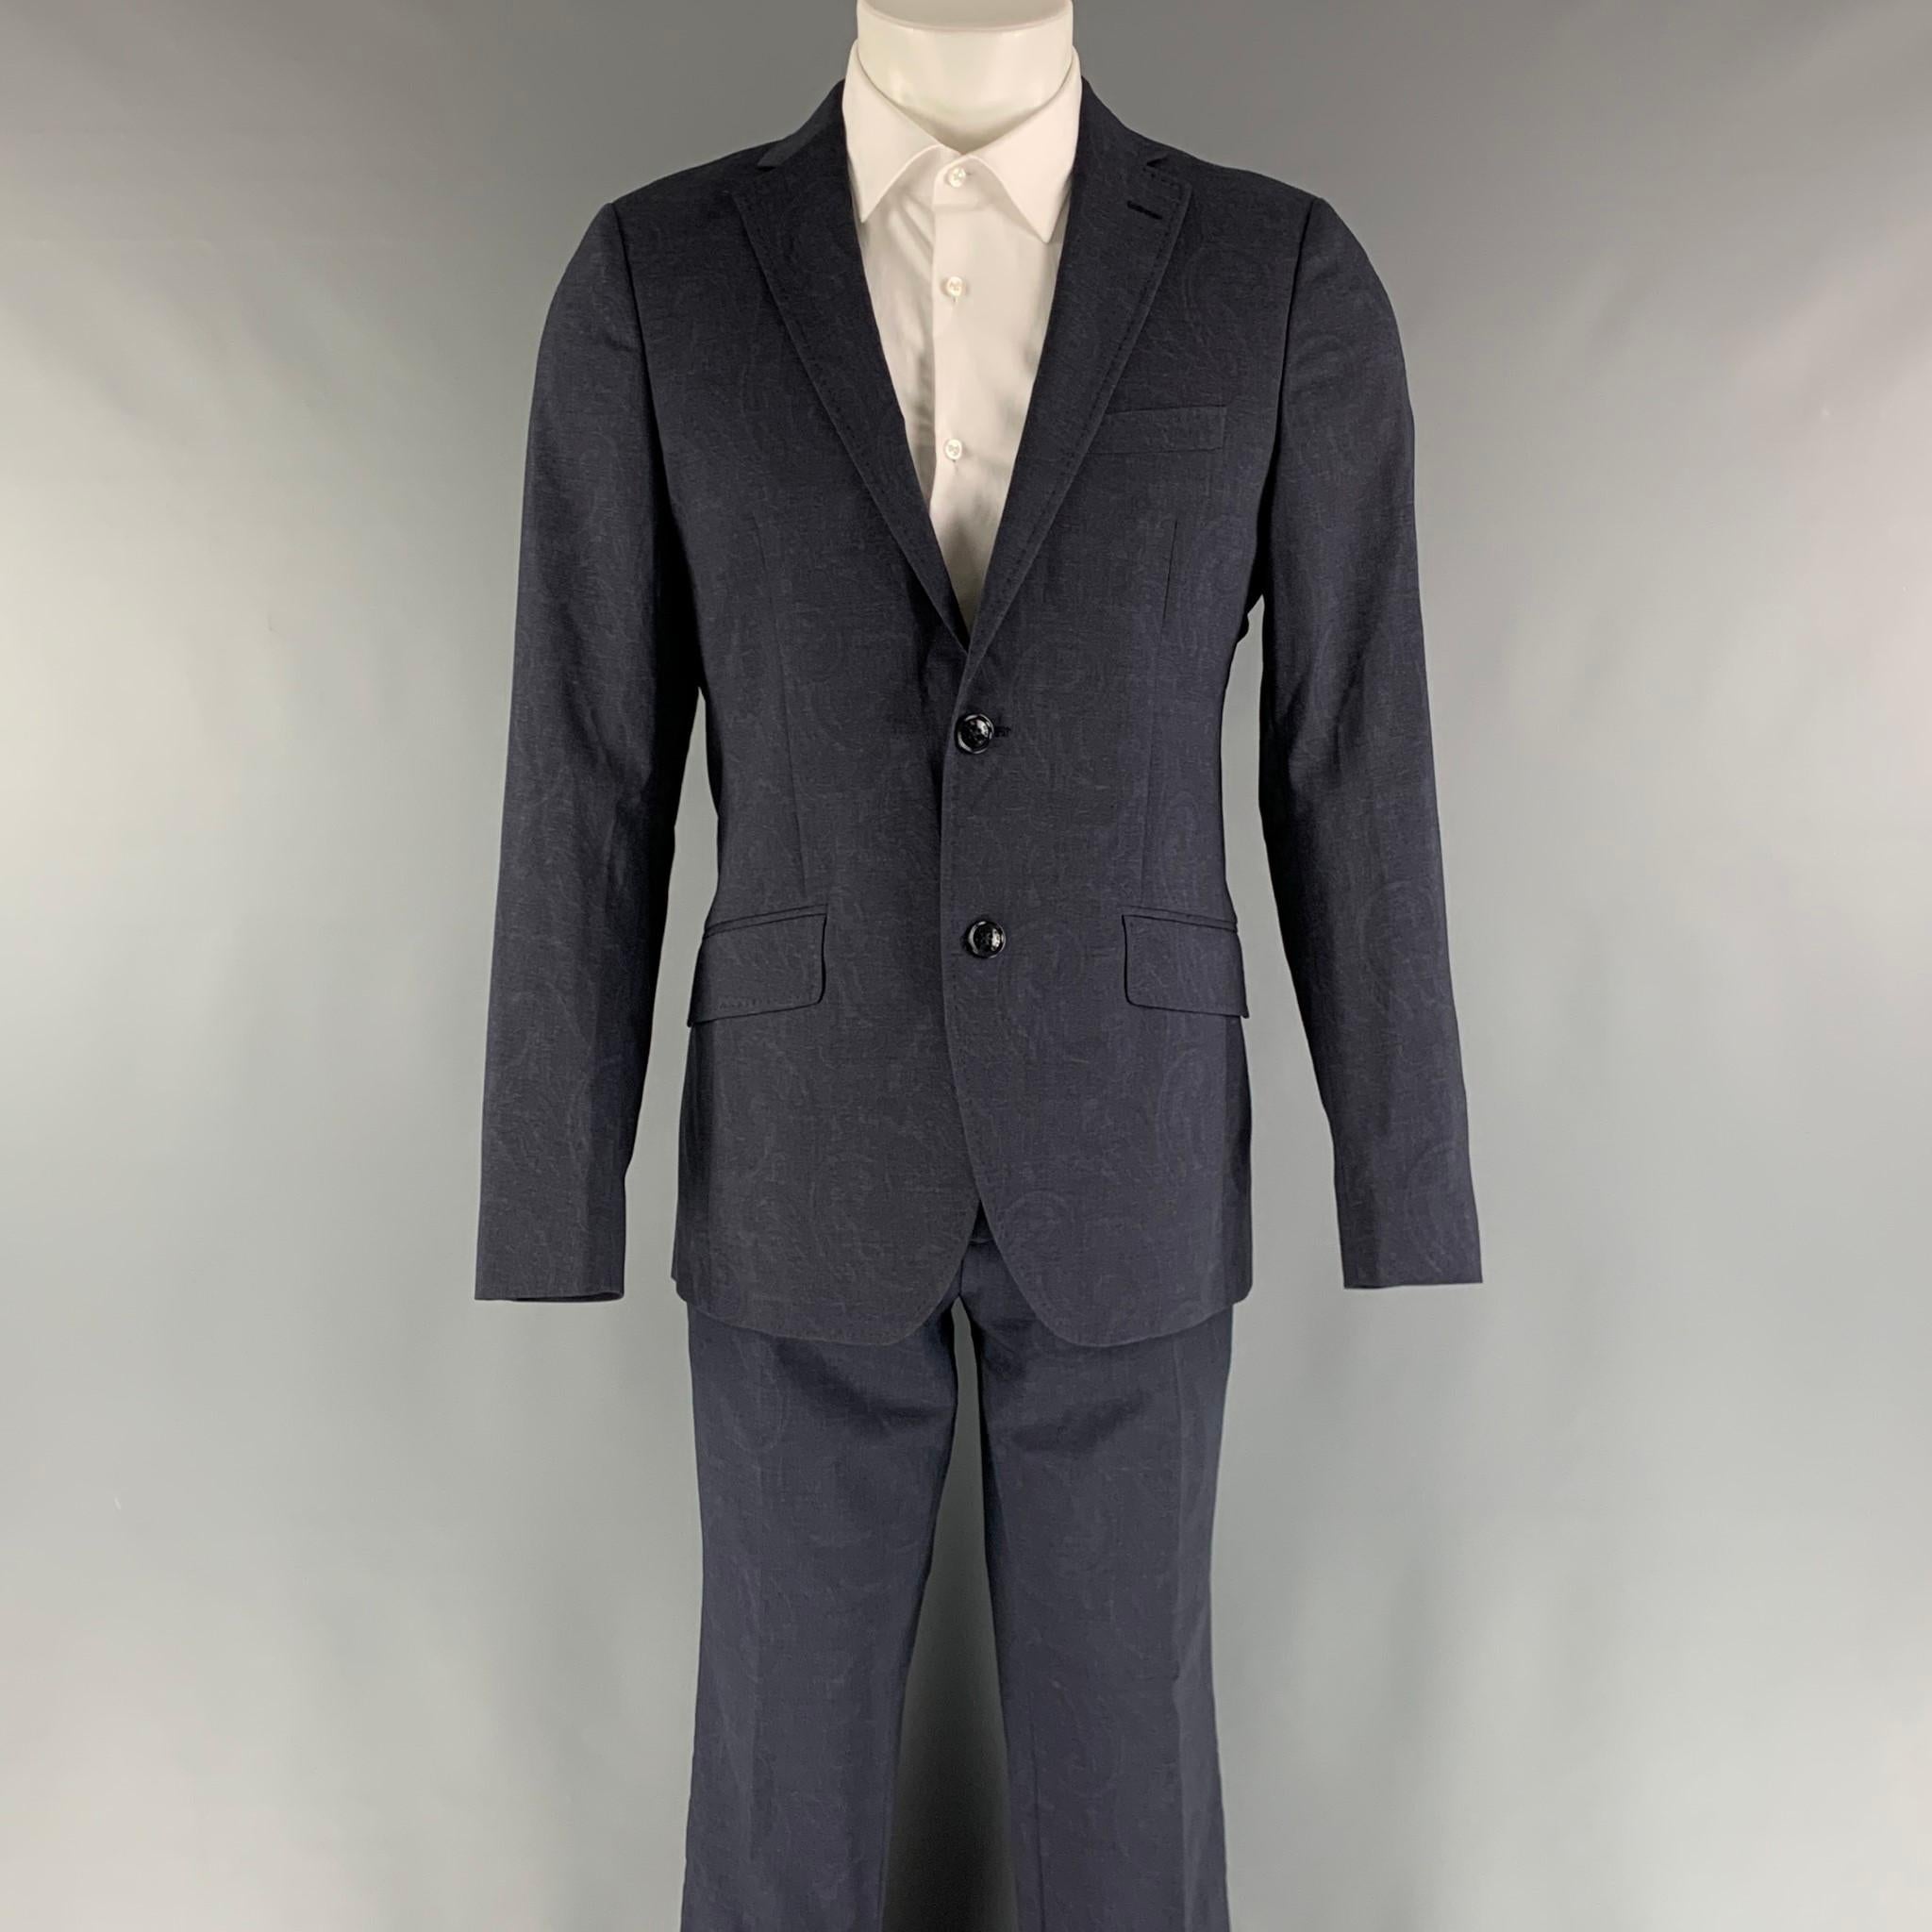 ETRO suit comes in a navy paisley wool and elastane material with a full liner and includes a single breasted, two button sport coat with notch lapel with top stitching and matching flat front trousers. Made in Italy.

Excellent Pre-Owned